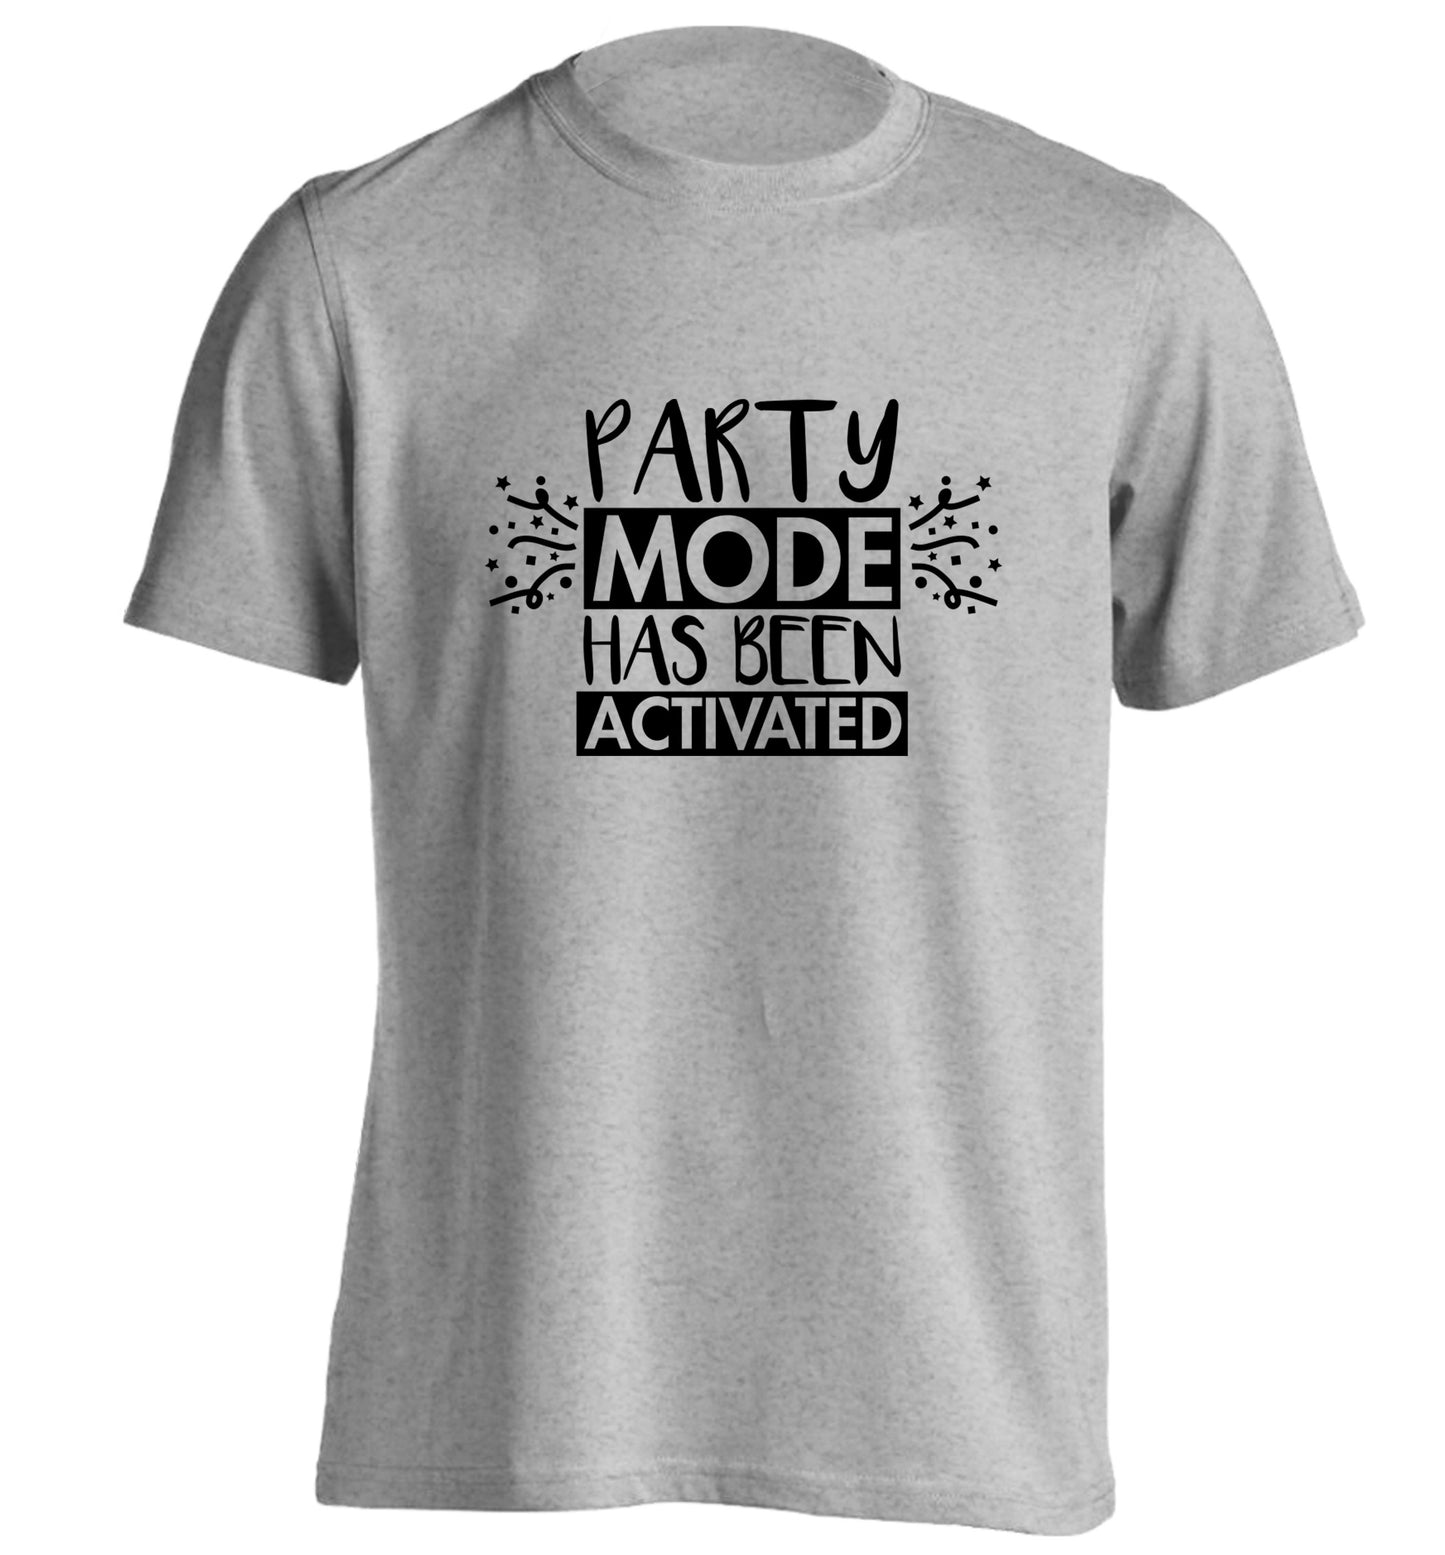 Please do not disturb party mode has been activated adults unisex grey Tshirt 2XL